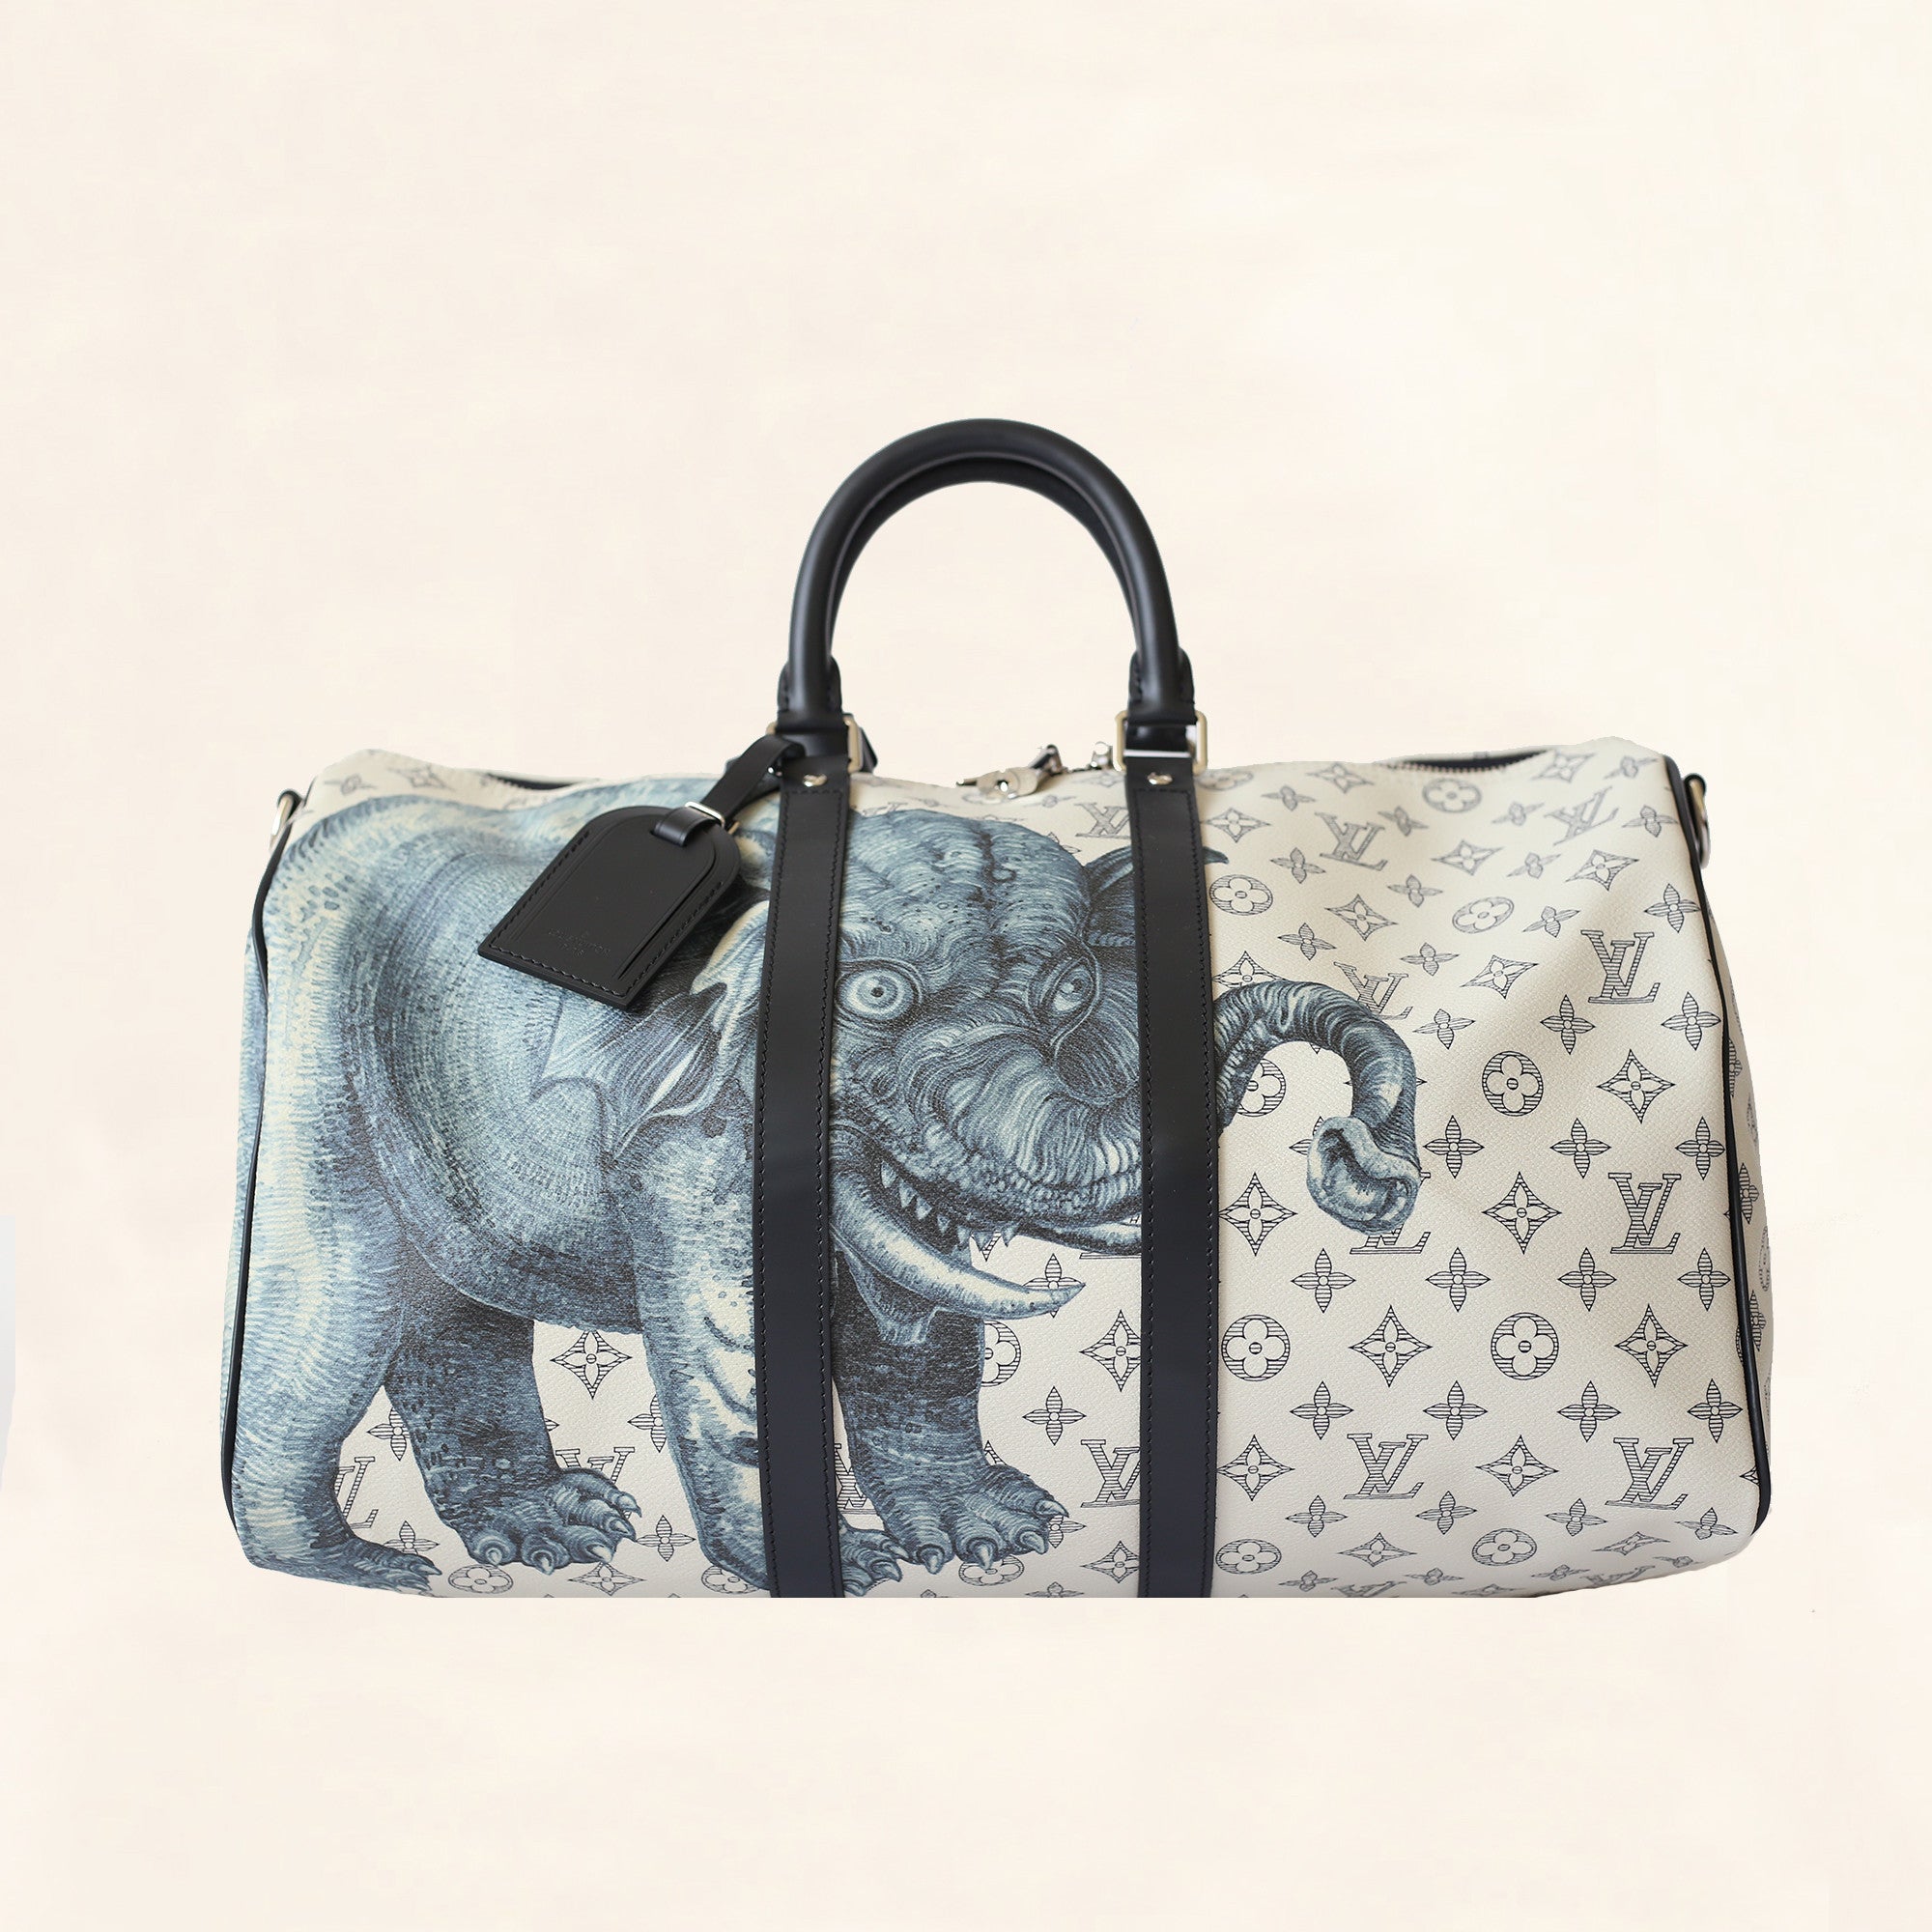 Louis Vuitton teams up with the Chapman brothers again